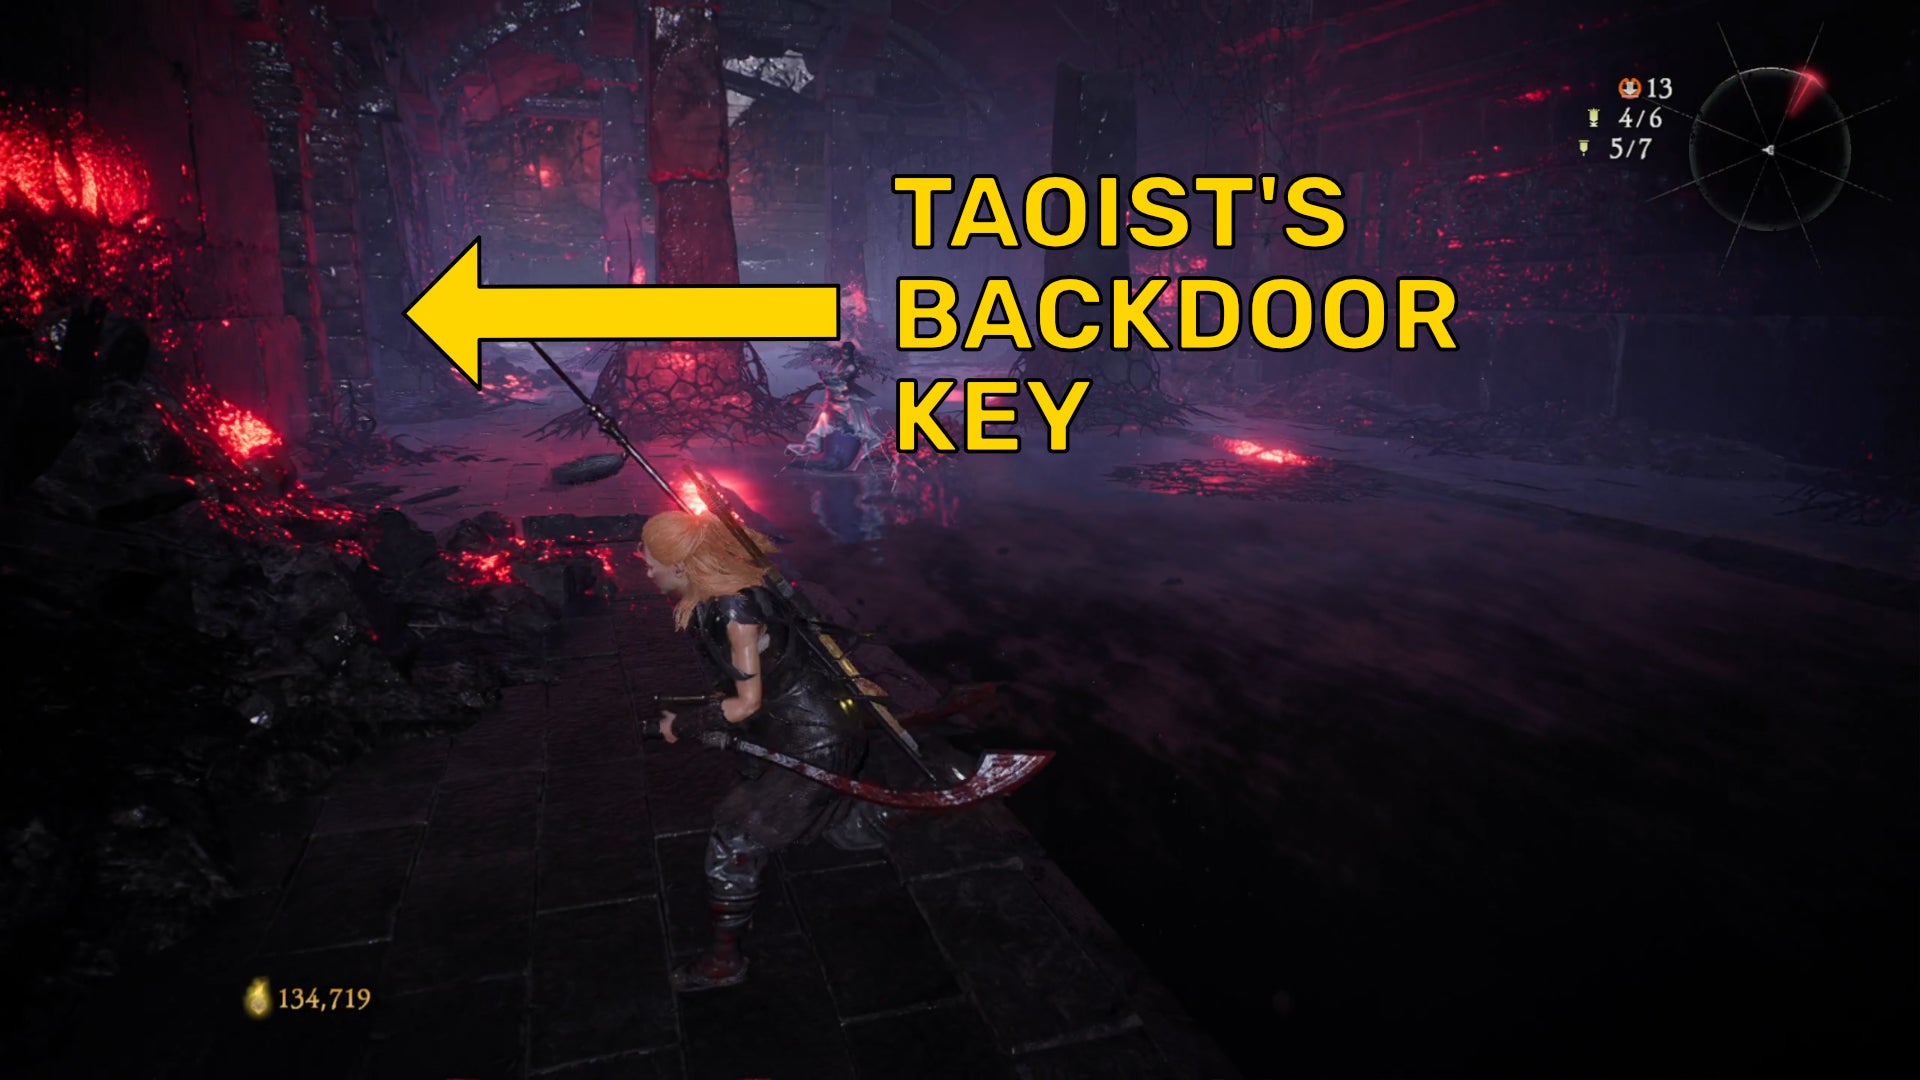 The player in Wo Long enters a large underground room with four pillars. An arrow points to the location of the Taoist's Backdoor Key.